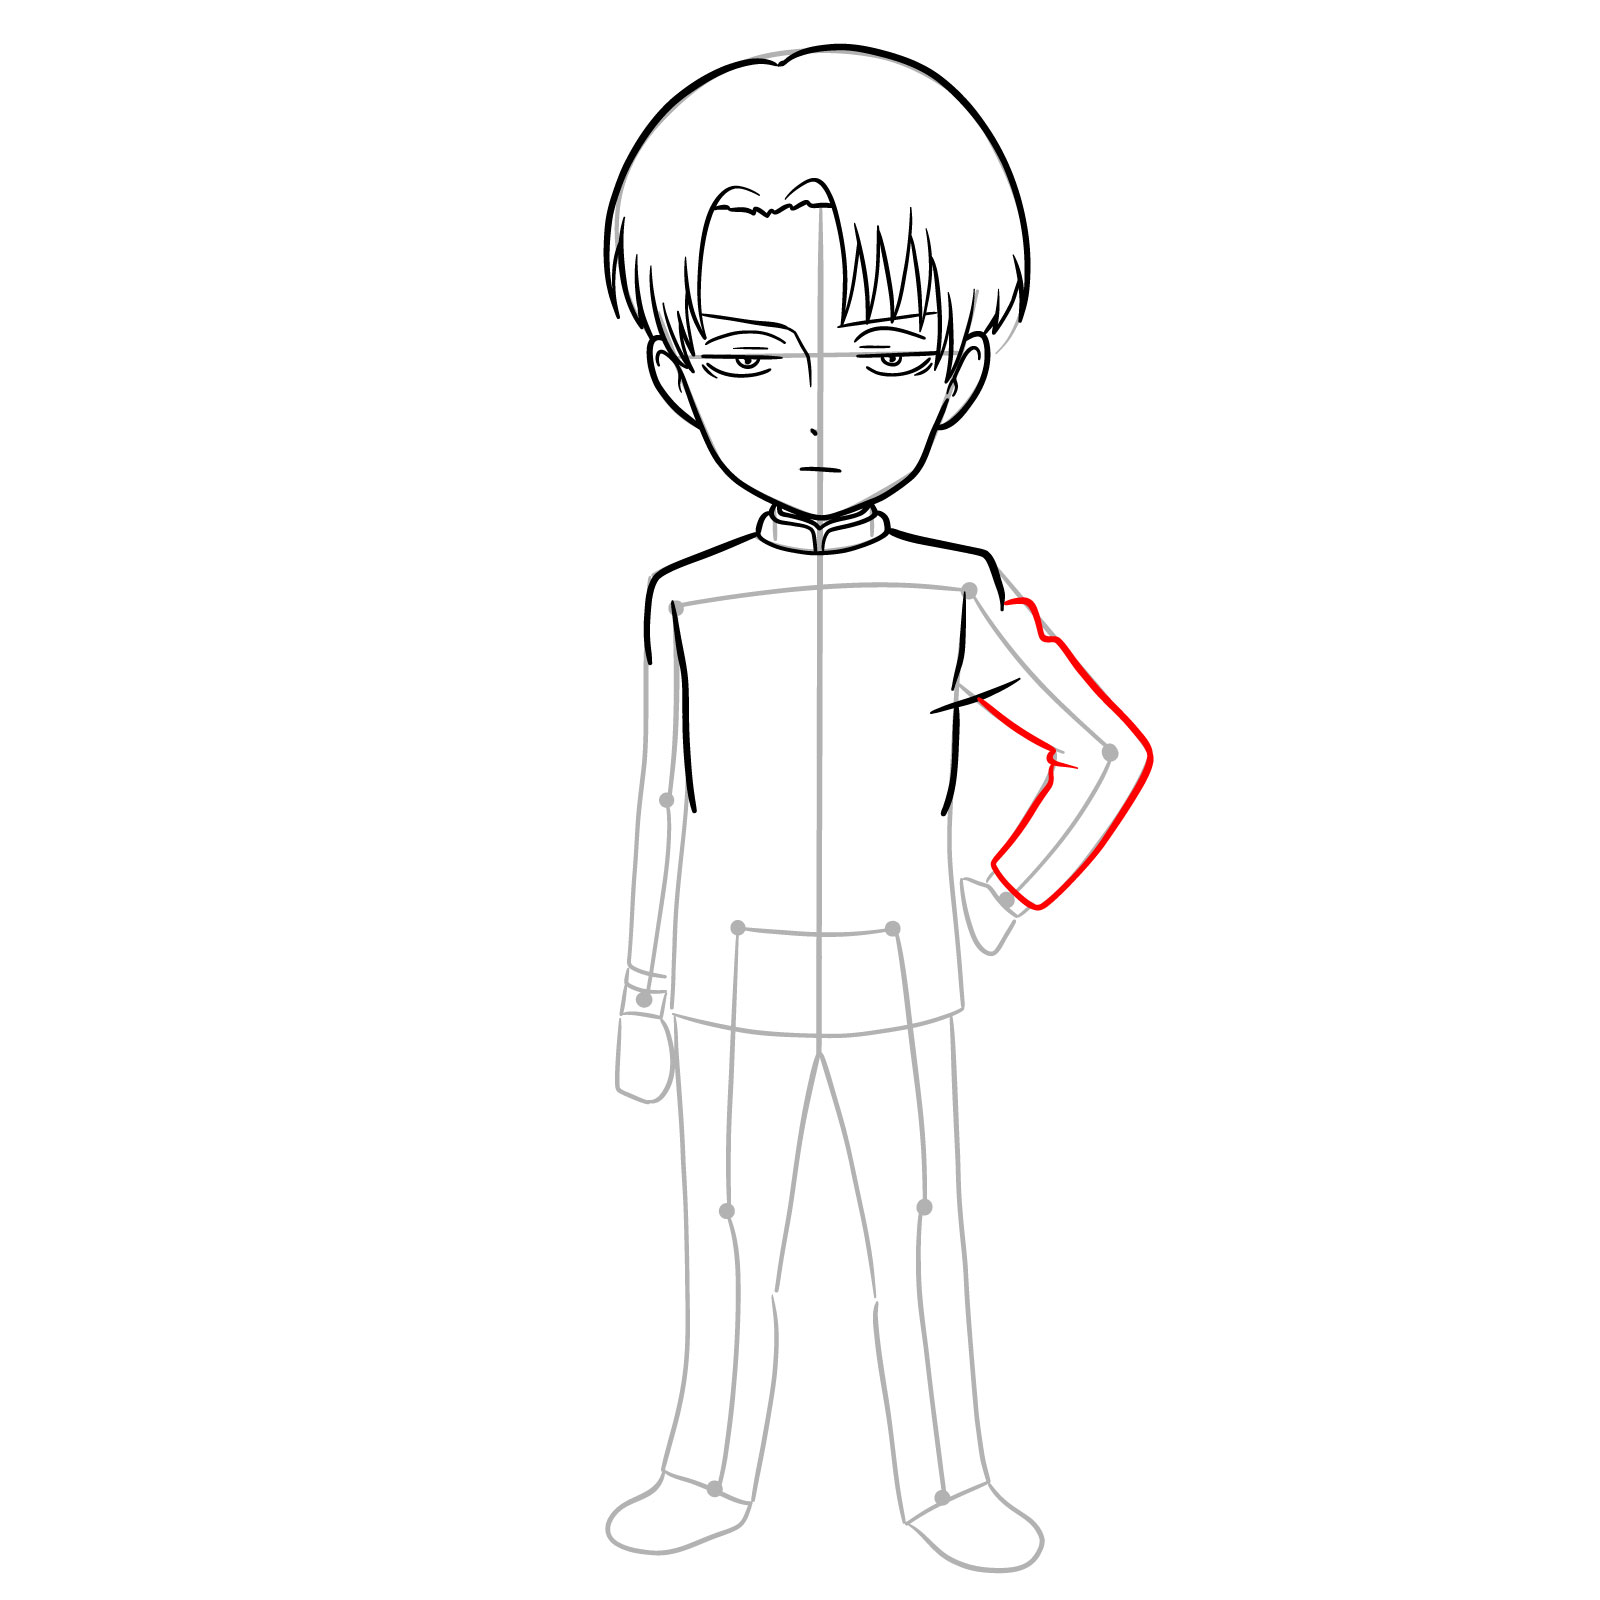 Chibi Levi Ackerman easy drawing with the outline of the arm resting on the hip - step 11